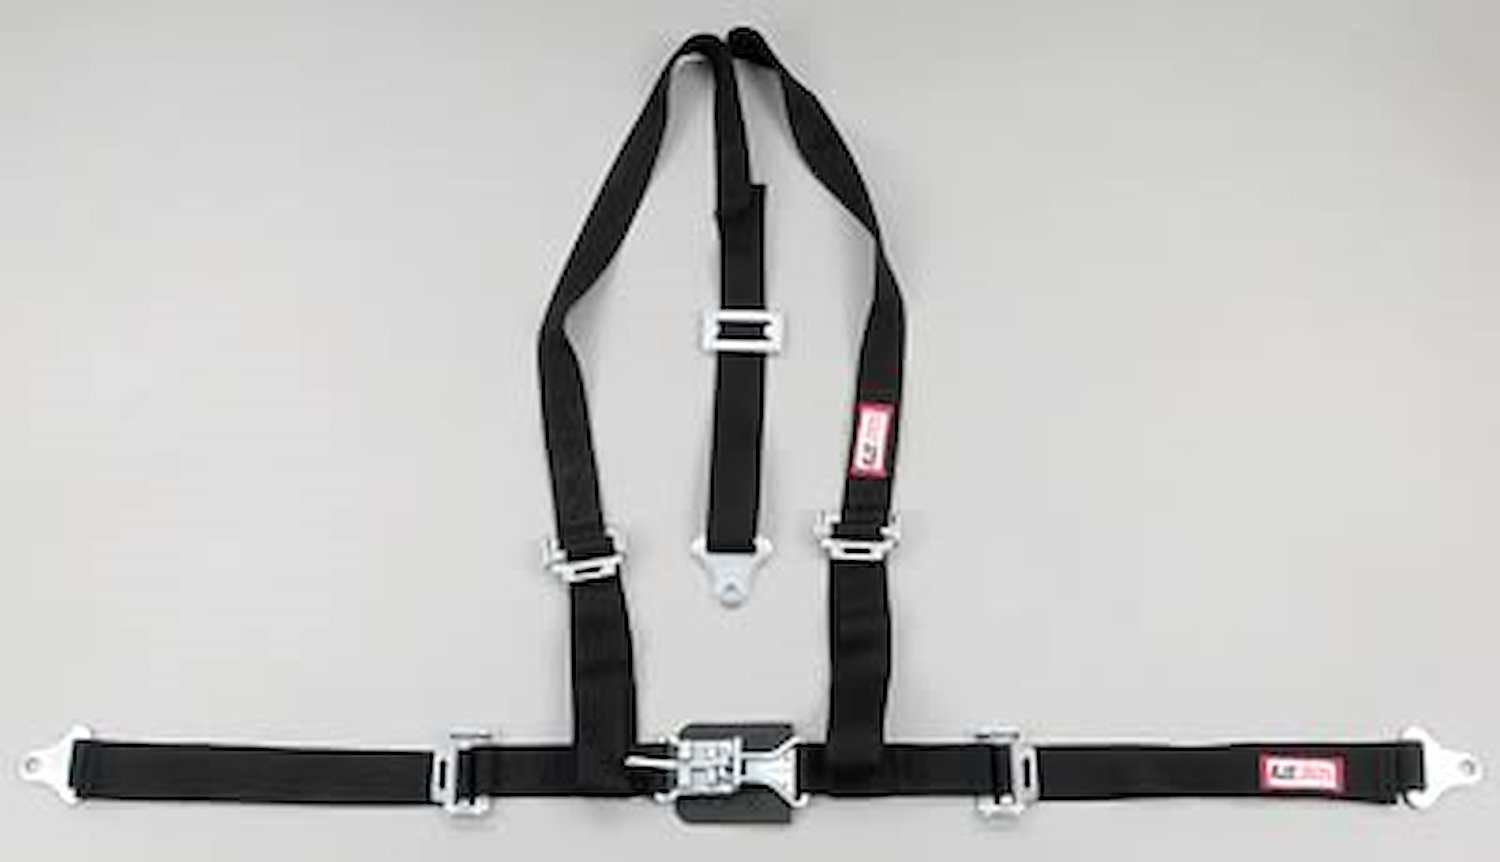 NON-SFI L&L HARNESS 3 PULL DOWN Lap BELT SNAP SEWN IN 2 S.H. Y FLOOR Mount WRAP/SNAP PURPLE